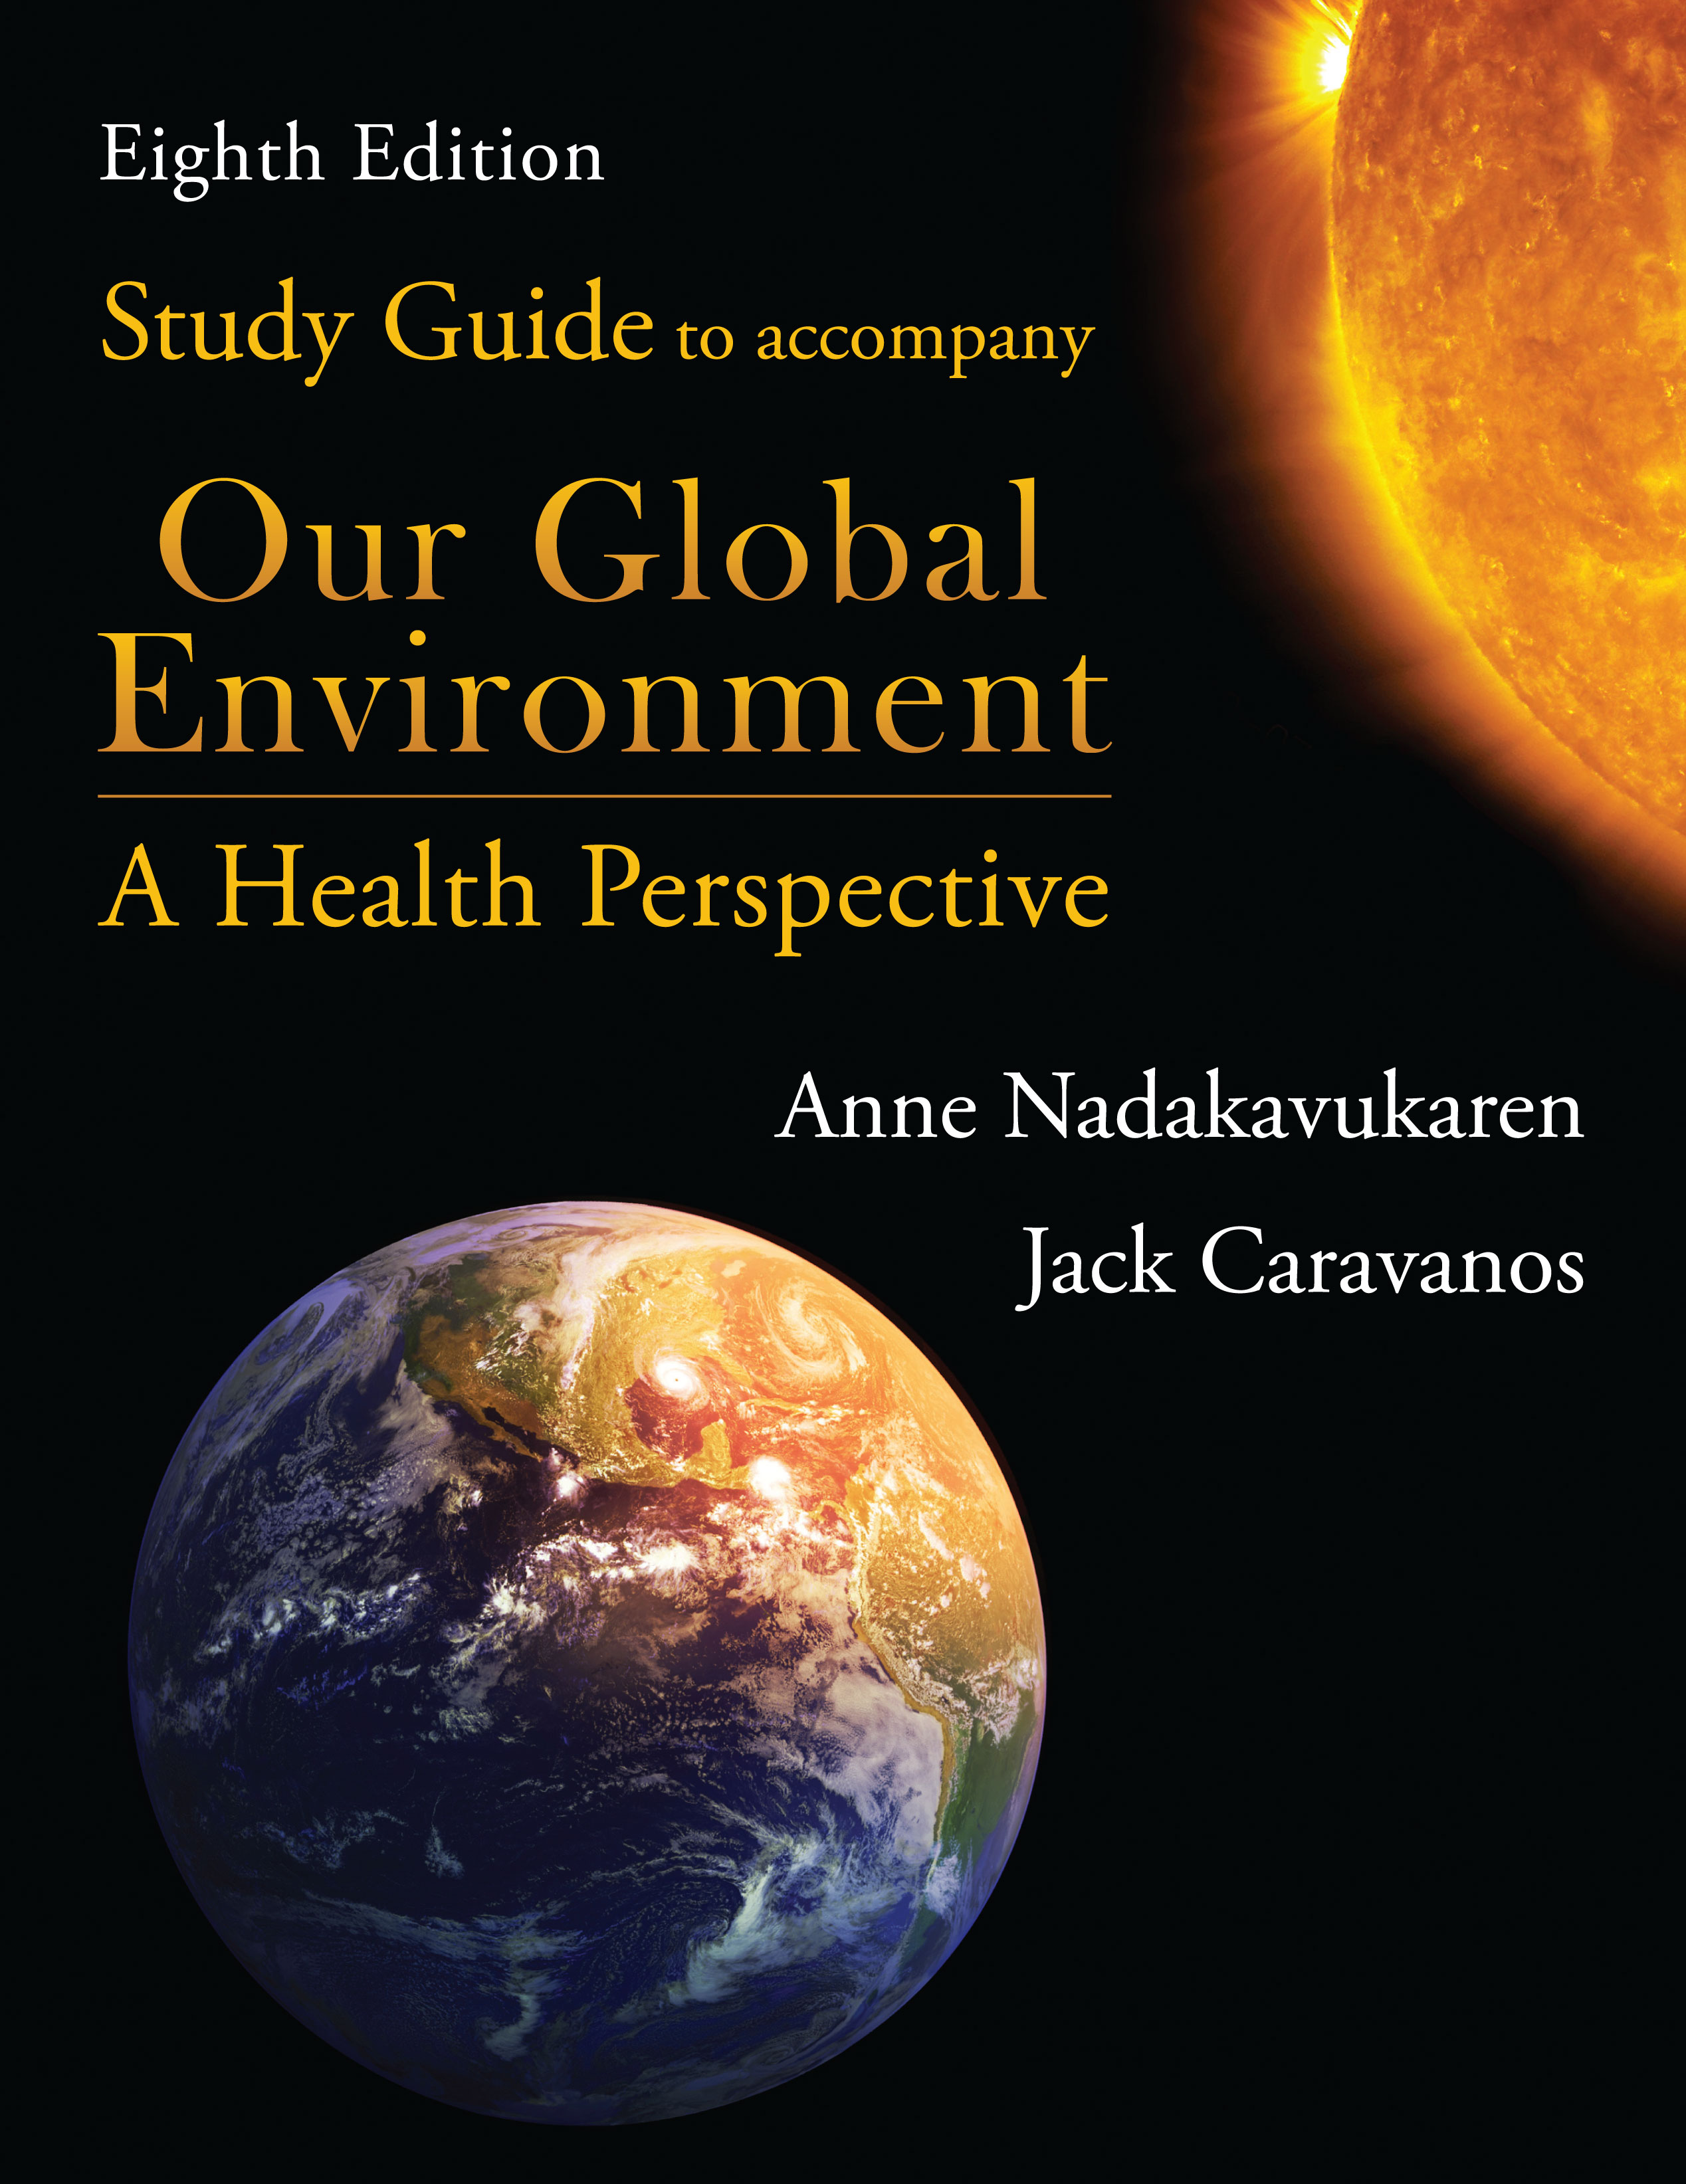 Study Guide to Accompany <i>Our Global Environment</i>: A Health Perspective by Anne  Nadakavukaren, Jack  Caravanos